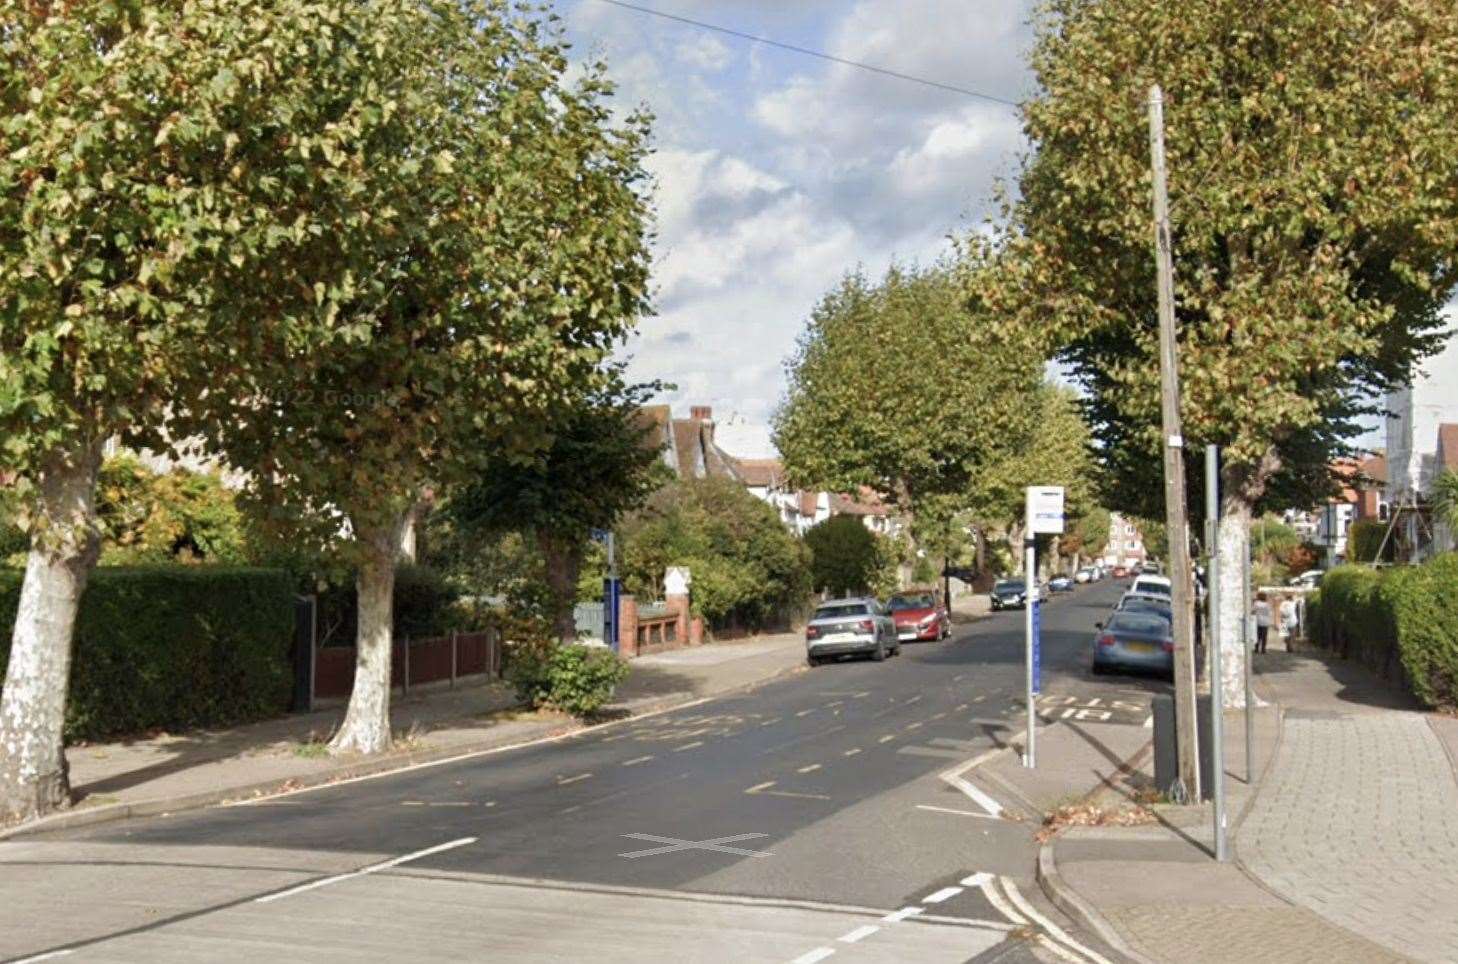 A man was found to be carrying a knife in Station Road, Herne Bay. Picture: Google